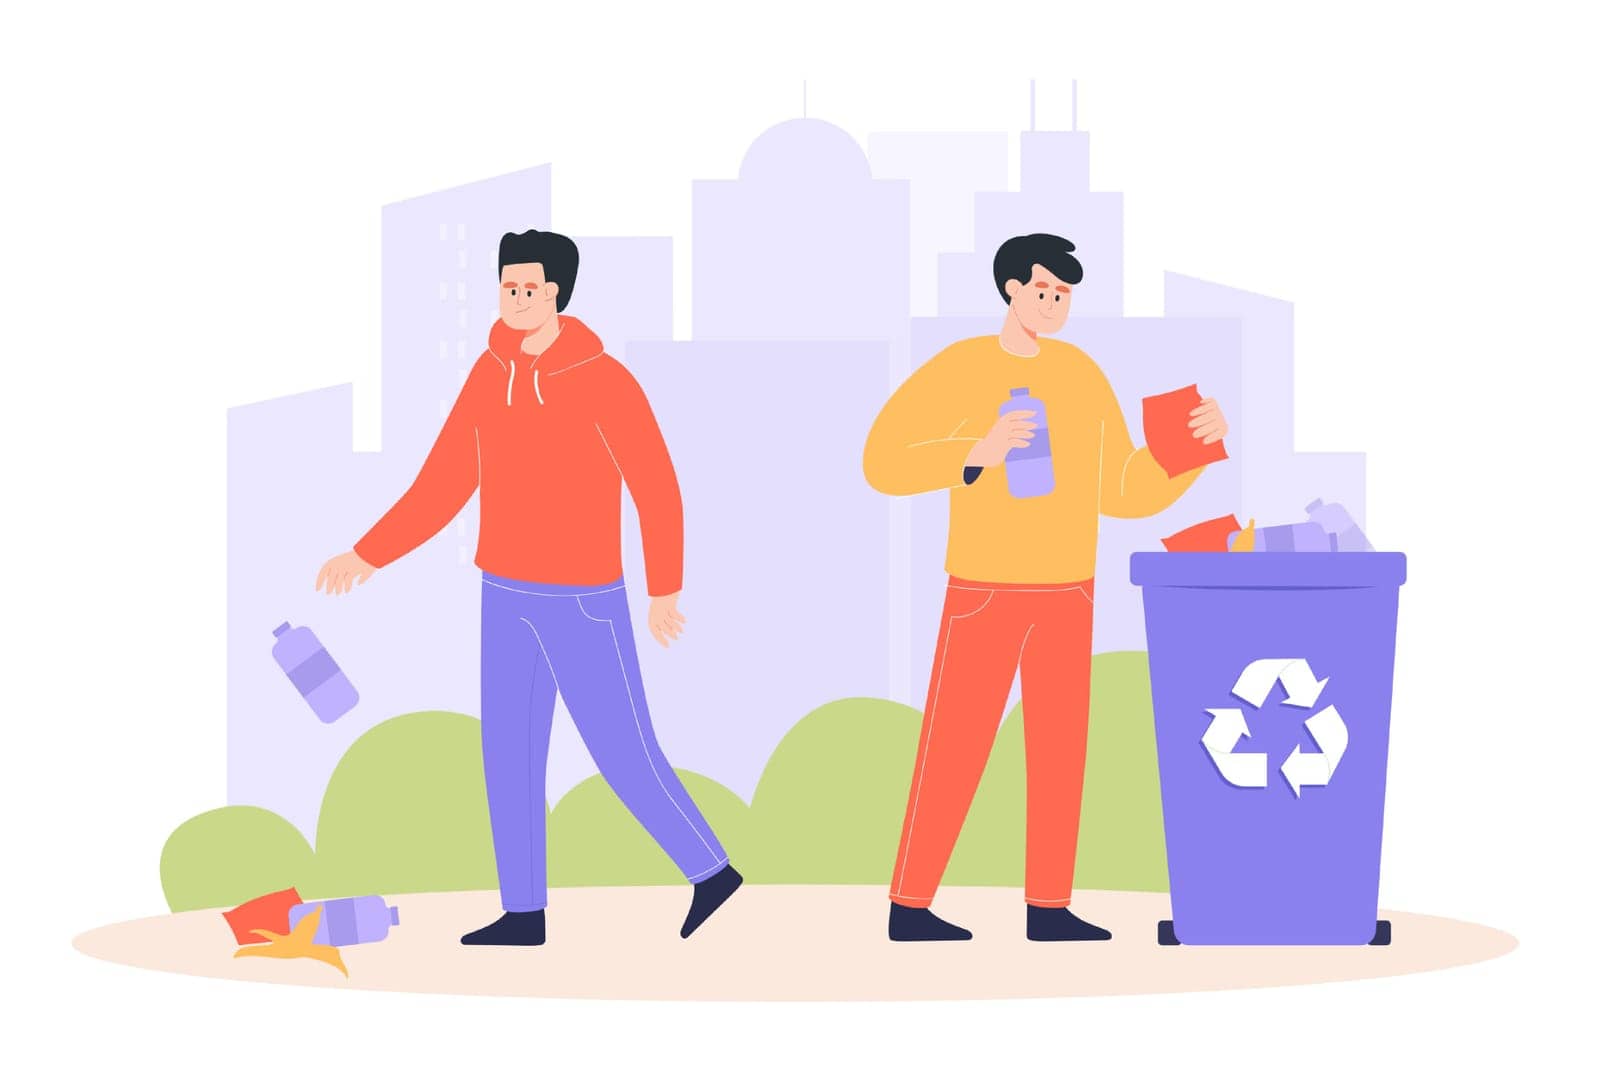 Right and wrong approach to throwing away trash. One man disposing waste on ground, another person throwing plastic or rubbish in recycling can flat vector illustration. Ecology, environment concept